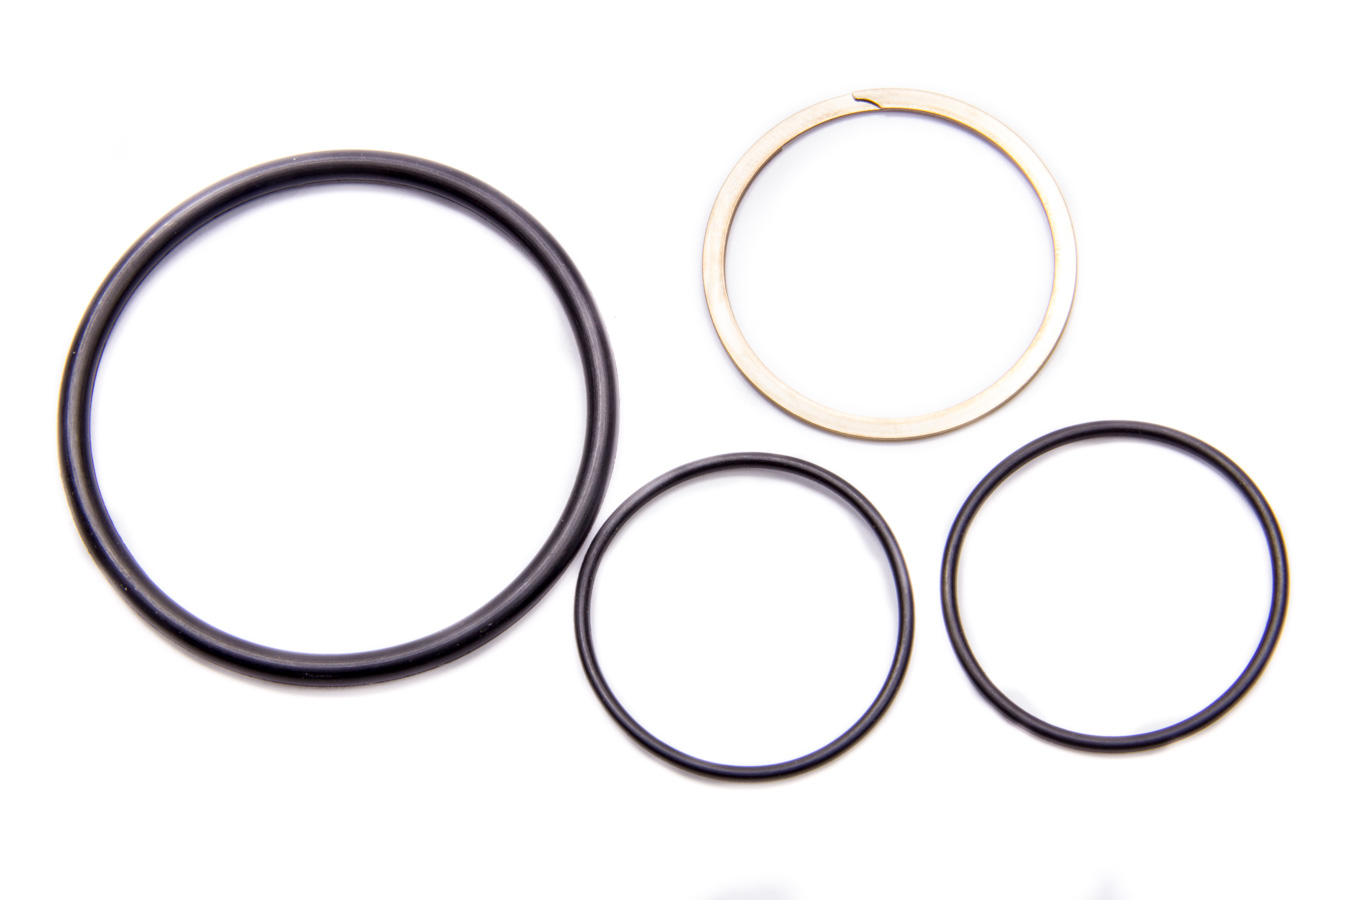 Peterson Fluid Filter Rebuild Kit O-Rings Rubber Peterson 600 Series … 09-0689